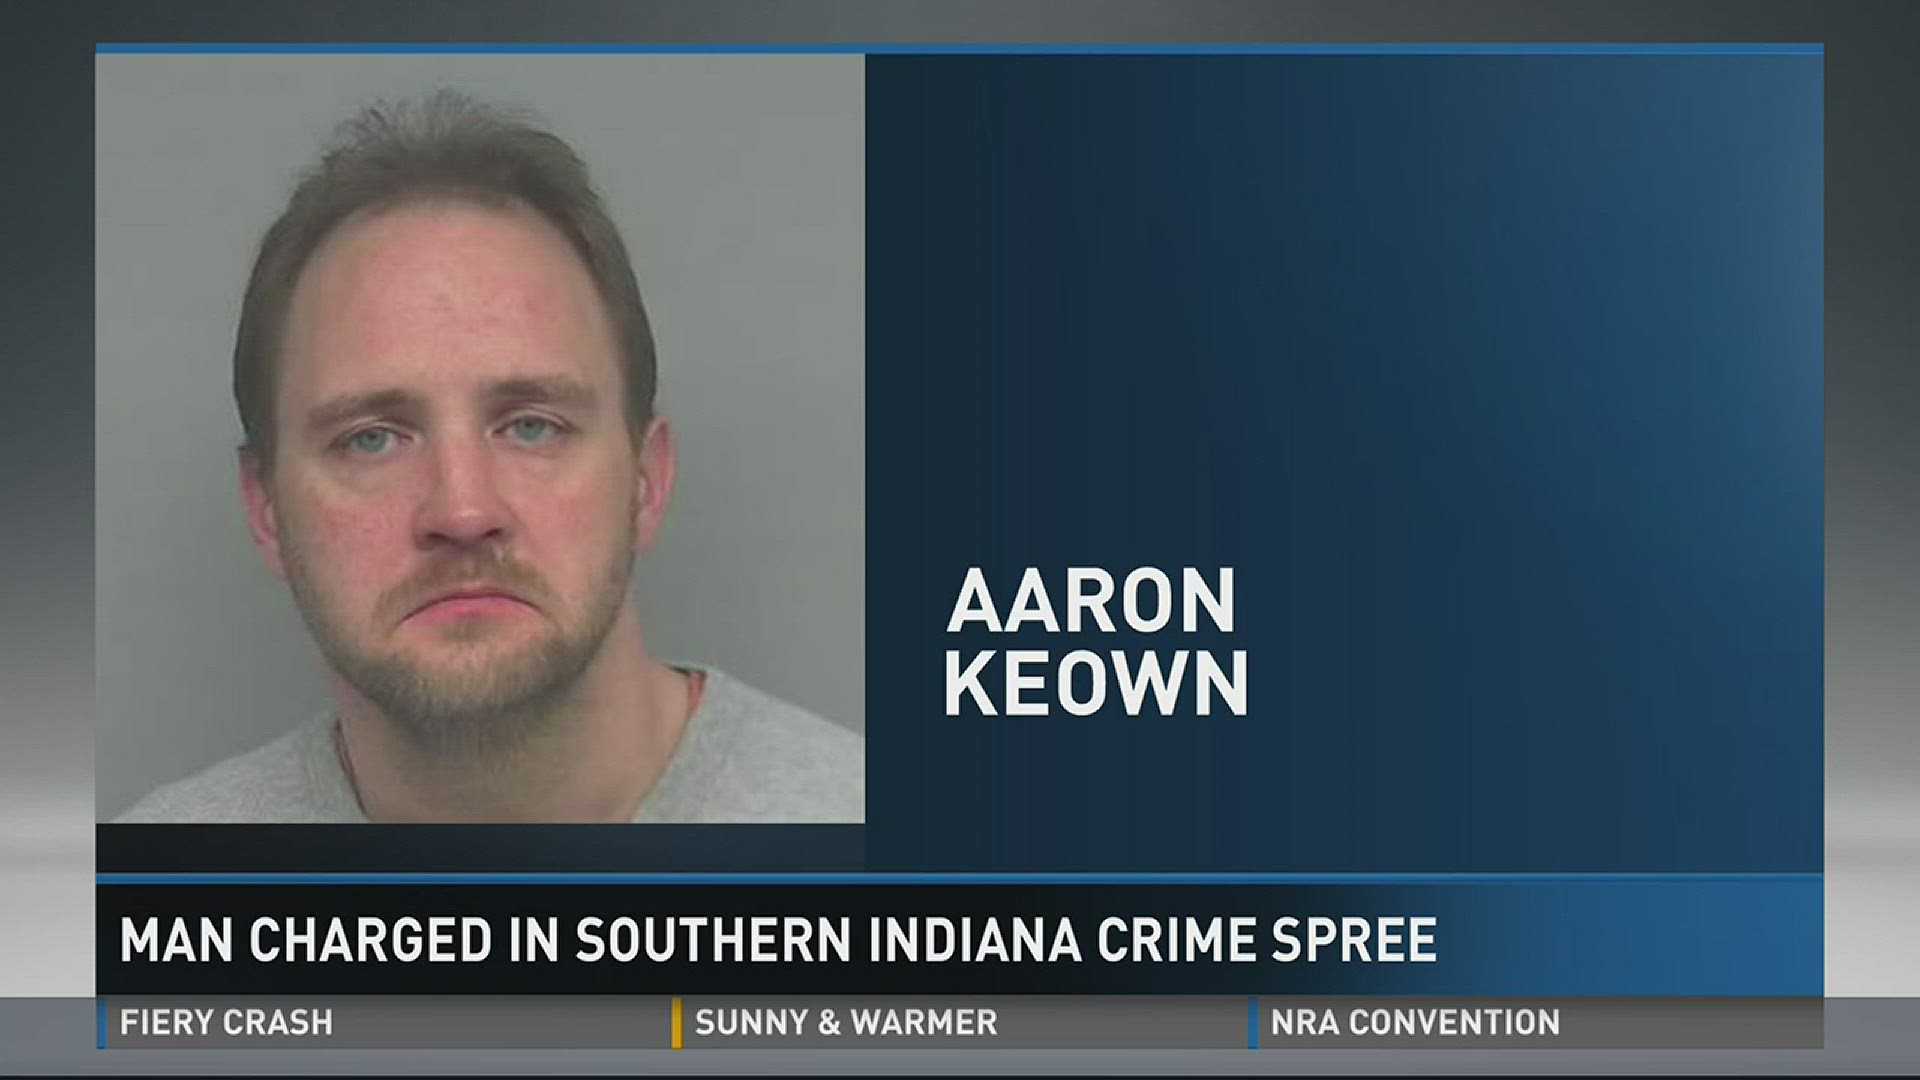 Man charged in Southern Indiana crime spree